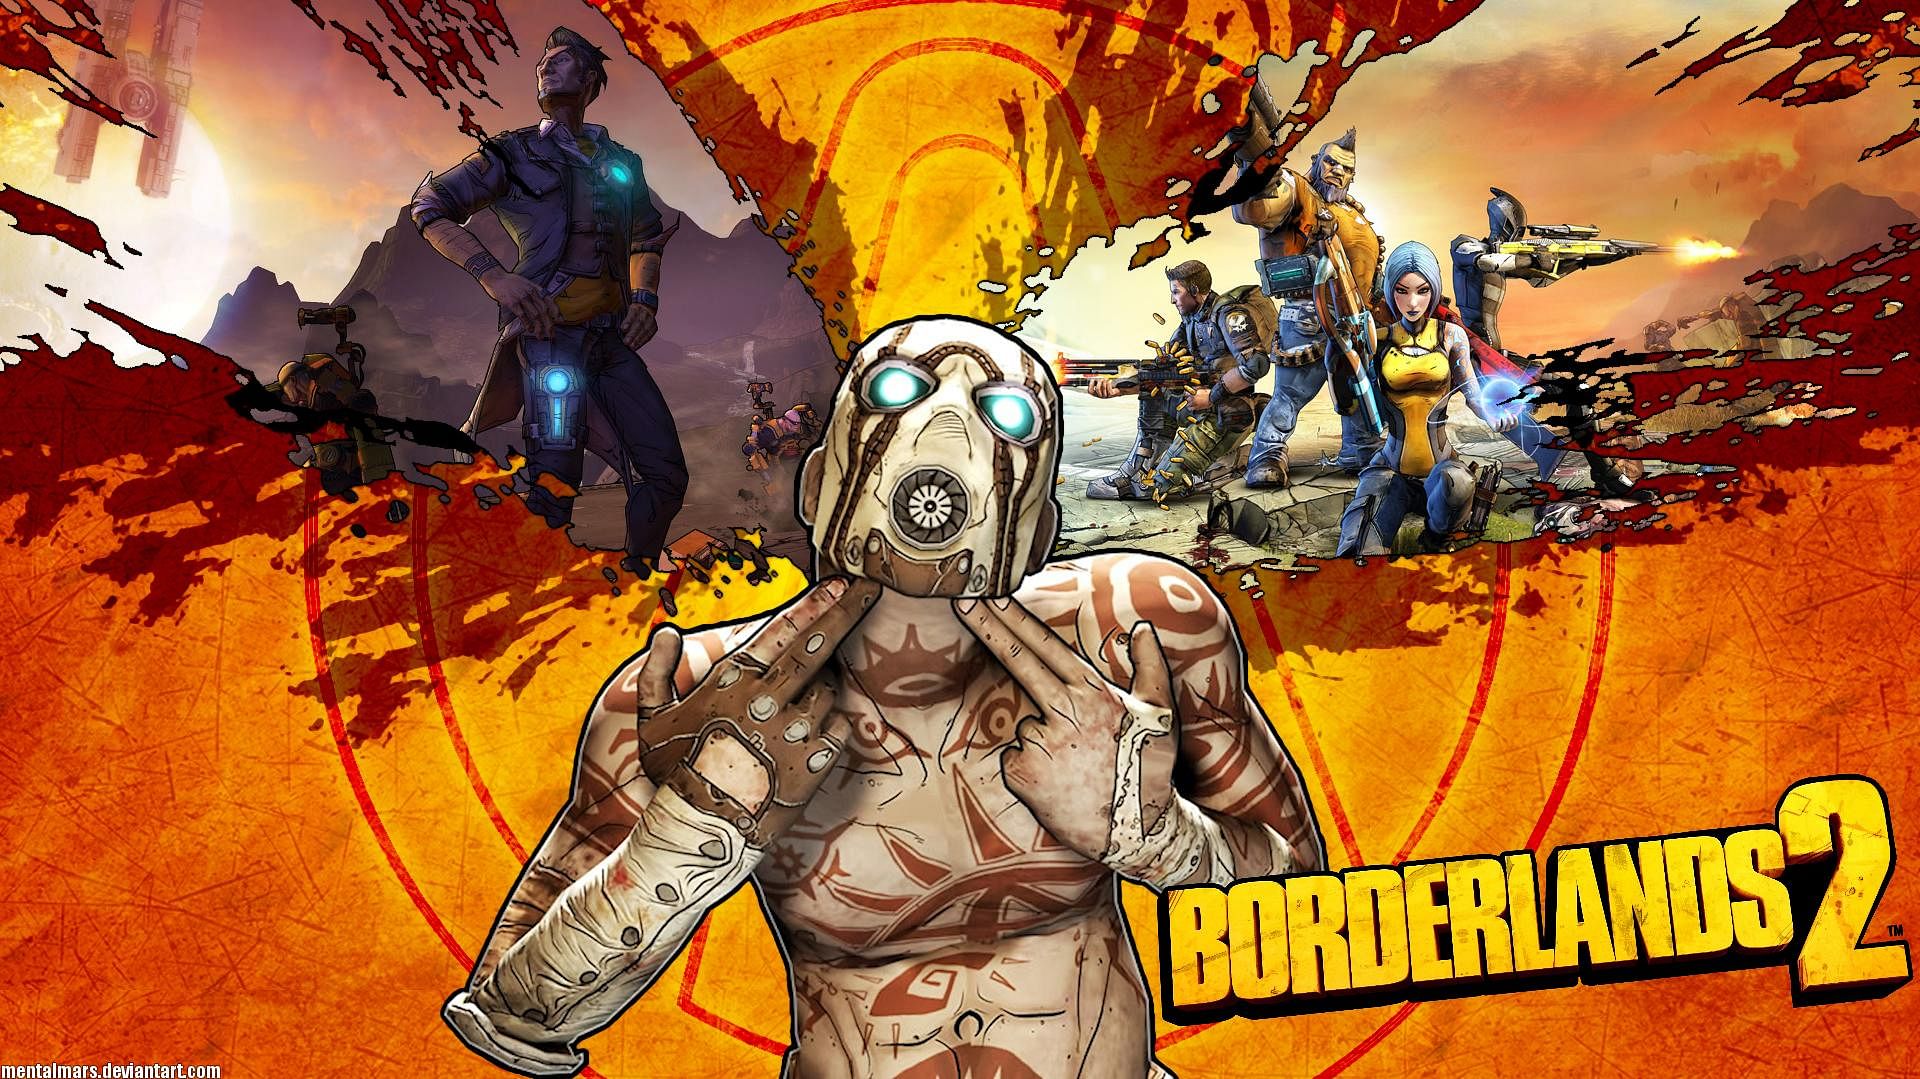 Borderlands may be getting a 'Remastered Edition'